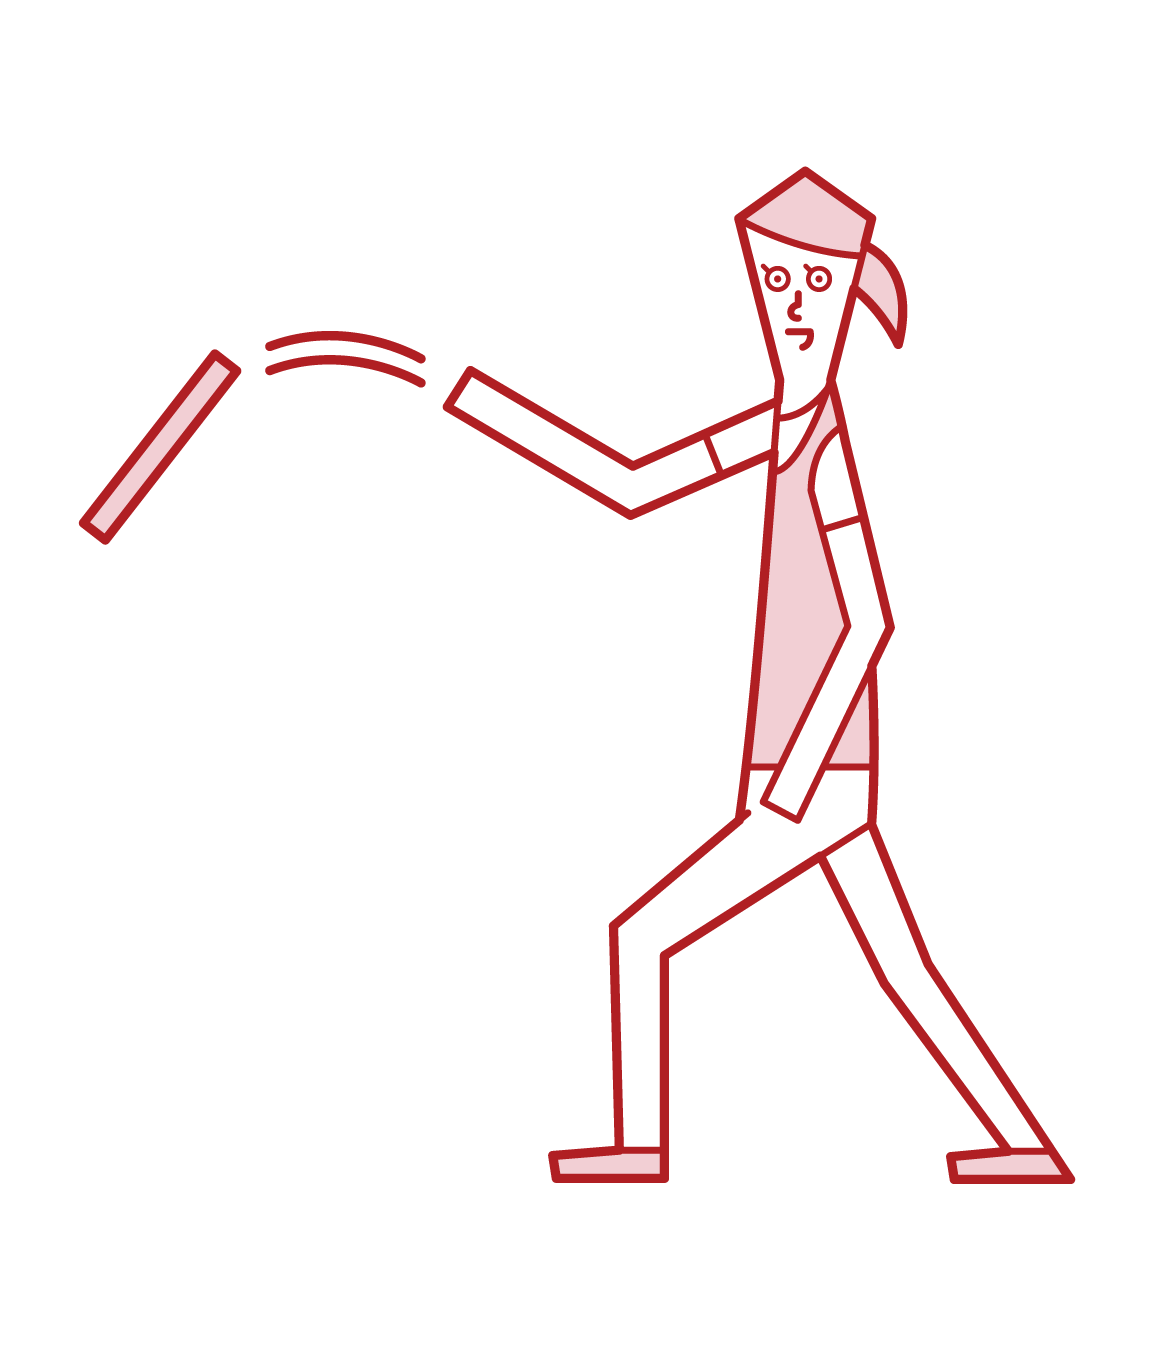 Illustration of a person (woman) throwing a rod